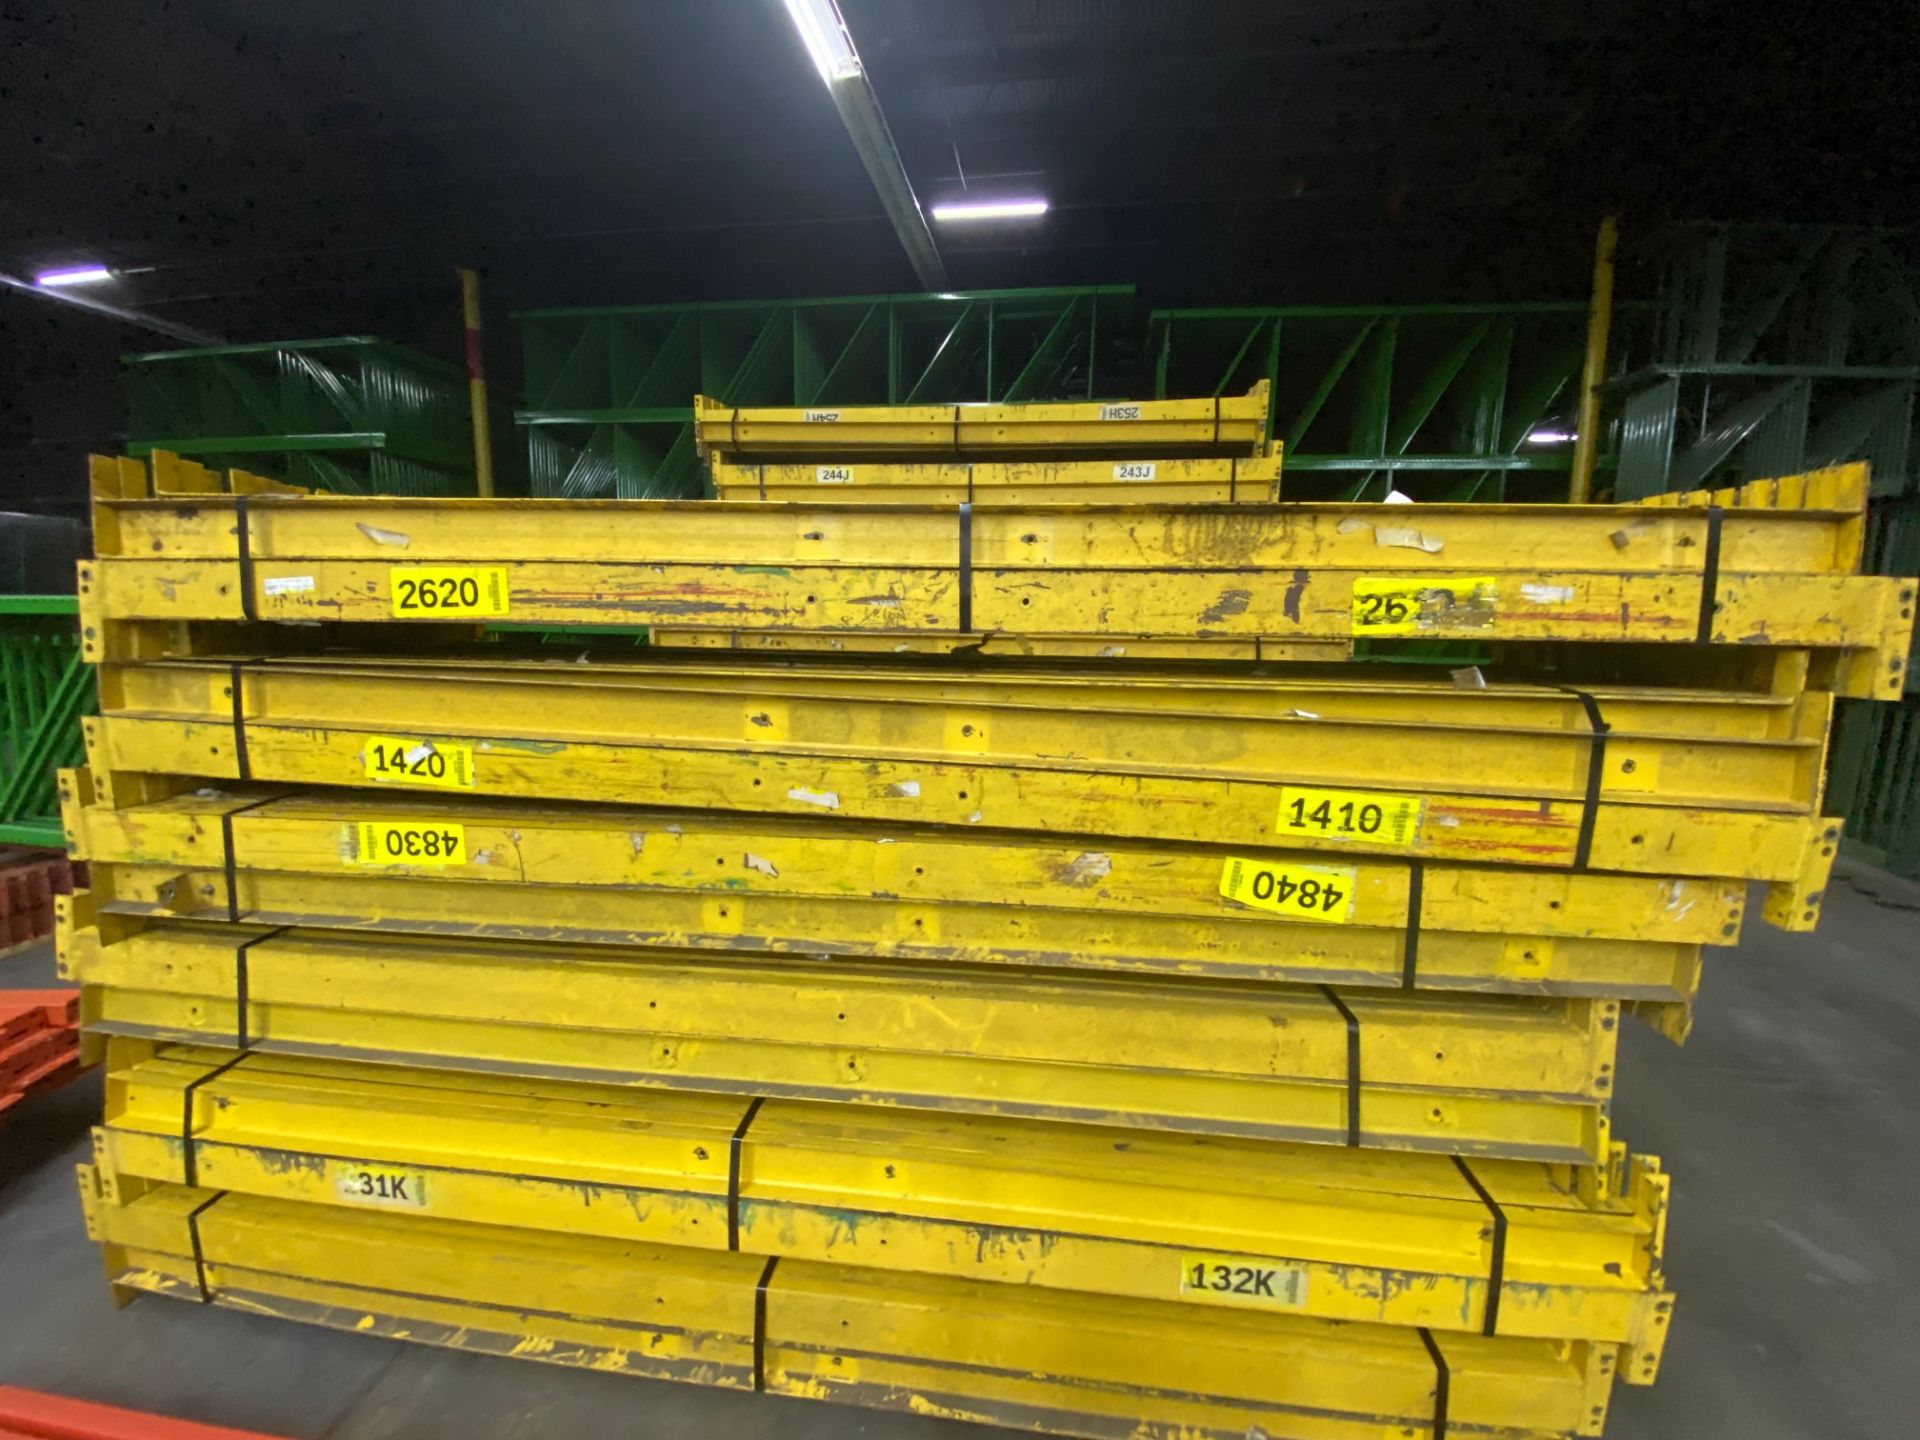 18 BAYS OF STRUCTURAL STYLE PALLET RACKS - 9 BAYS X 2 LINES X 30'H X 36"D X 112"W - Image 5 of 5